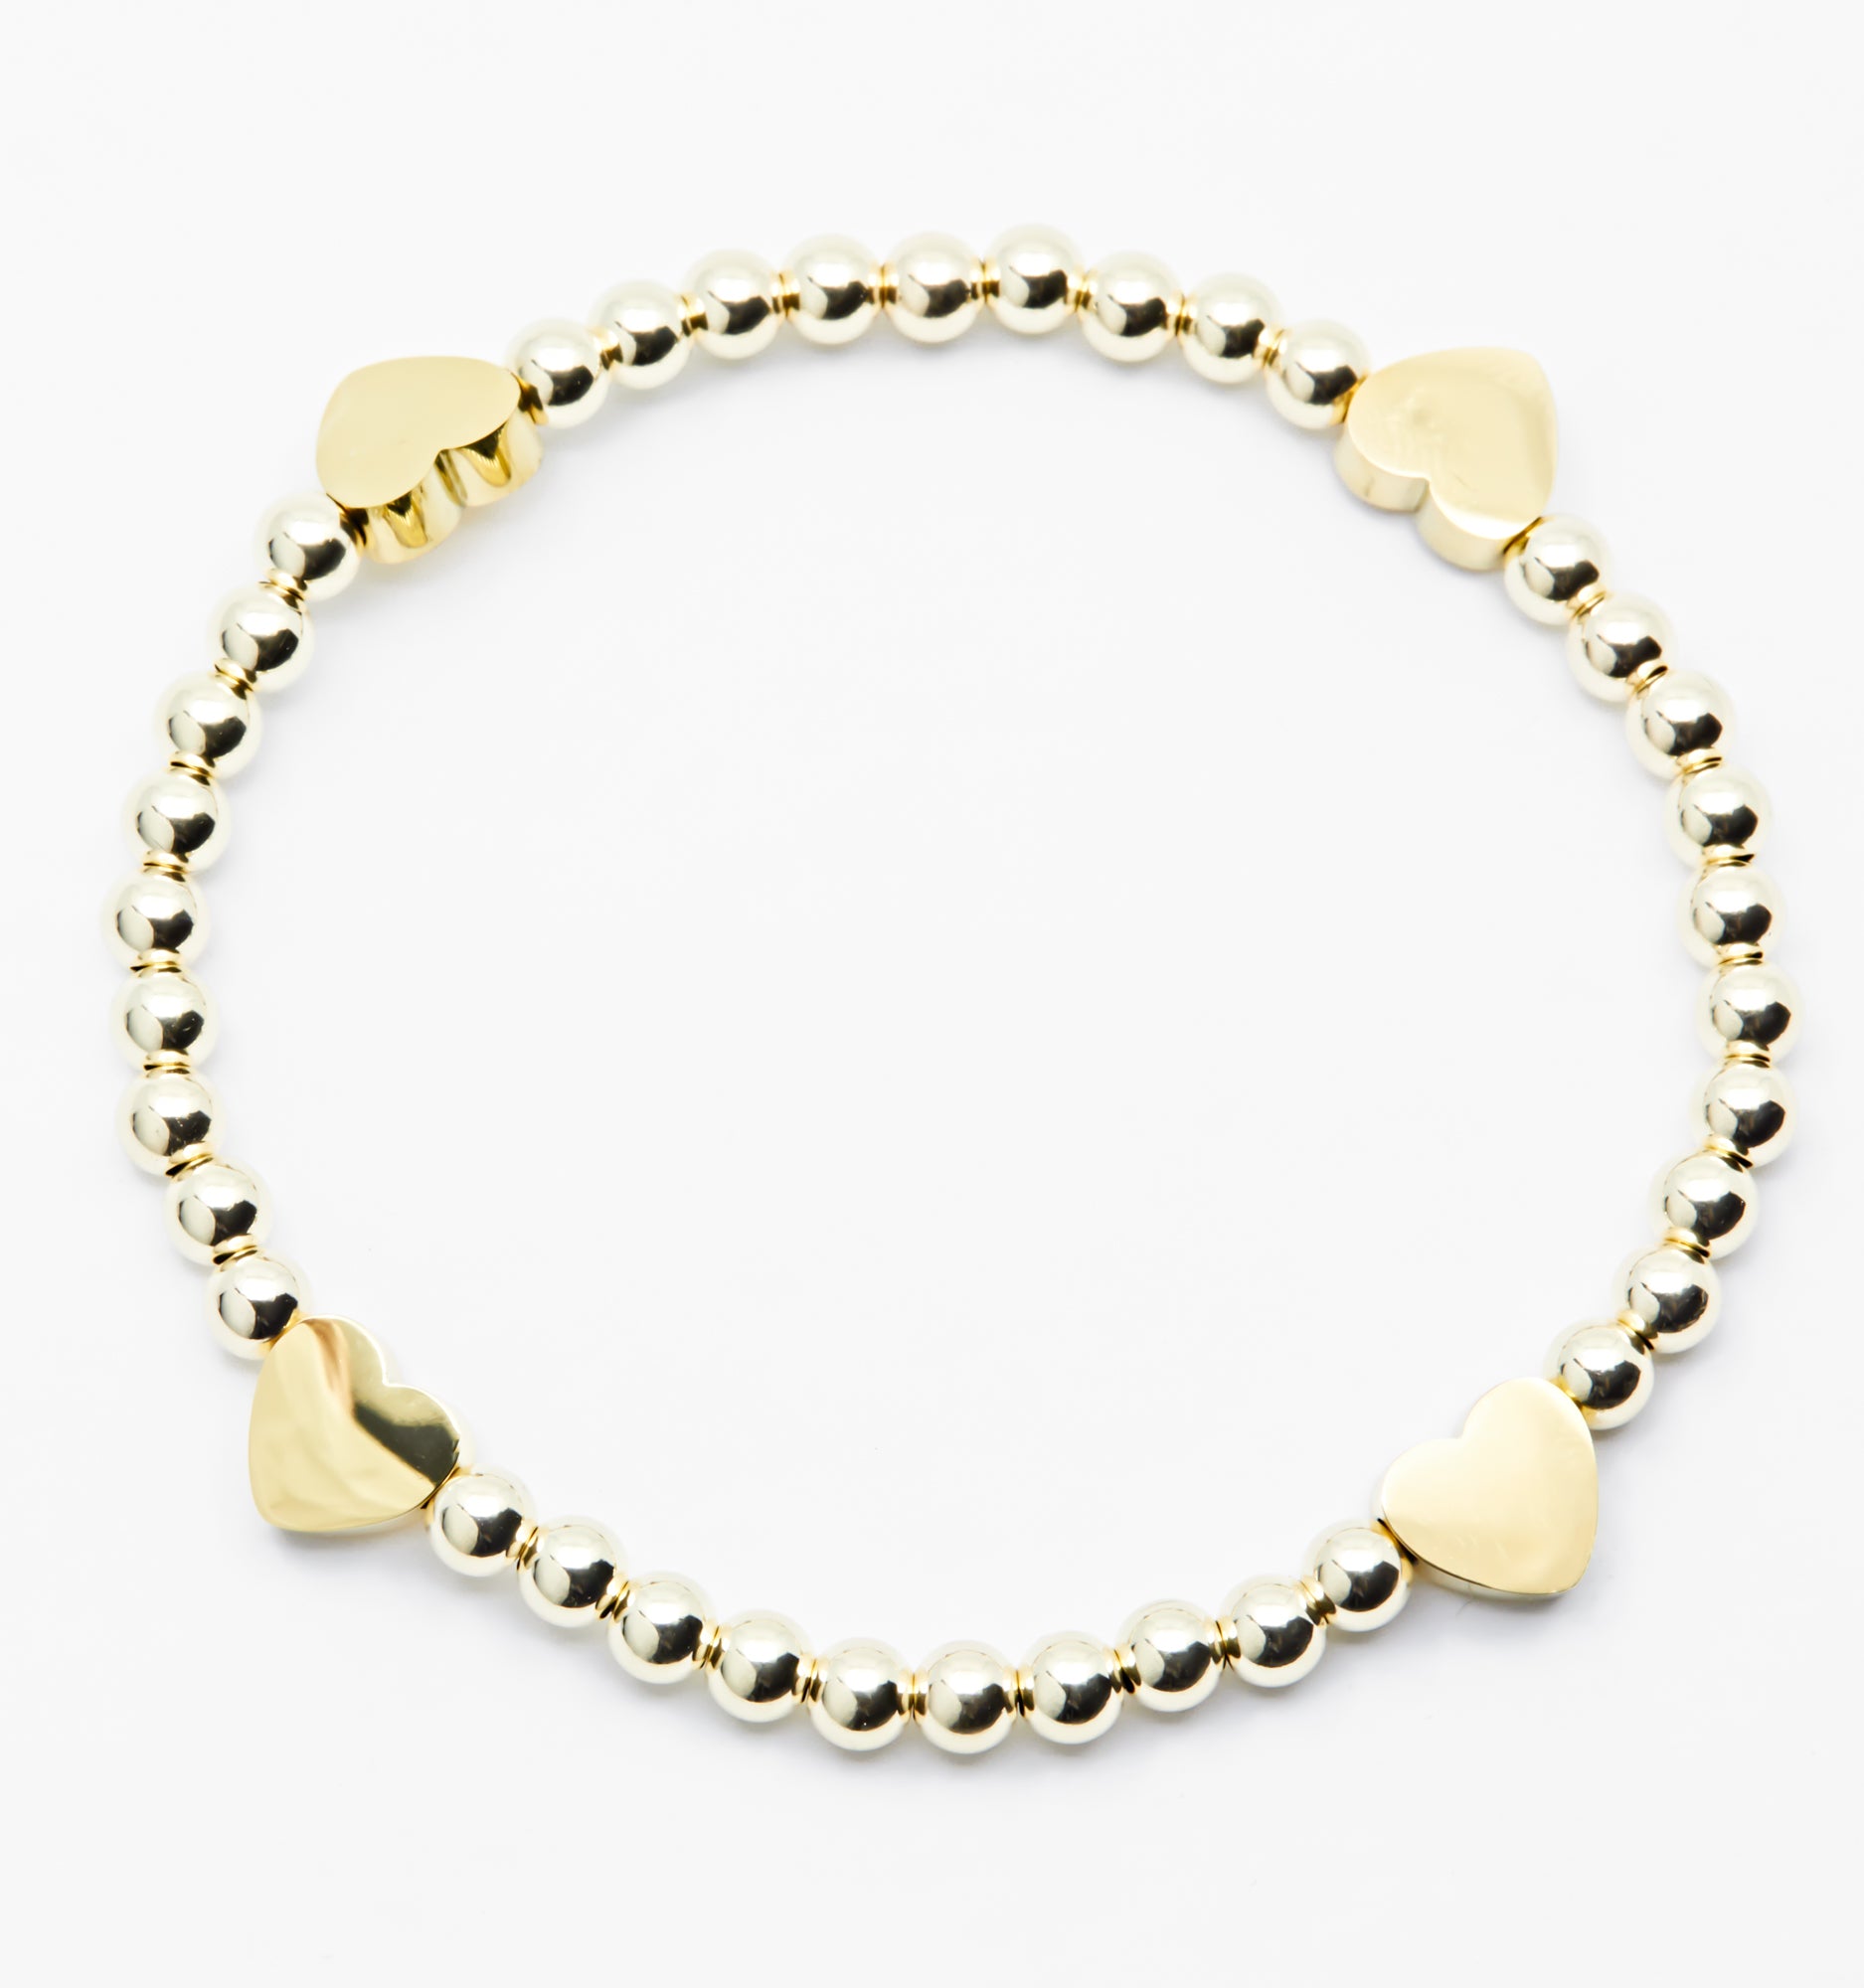 Heart Bracelet With Ball Chain